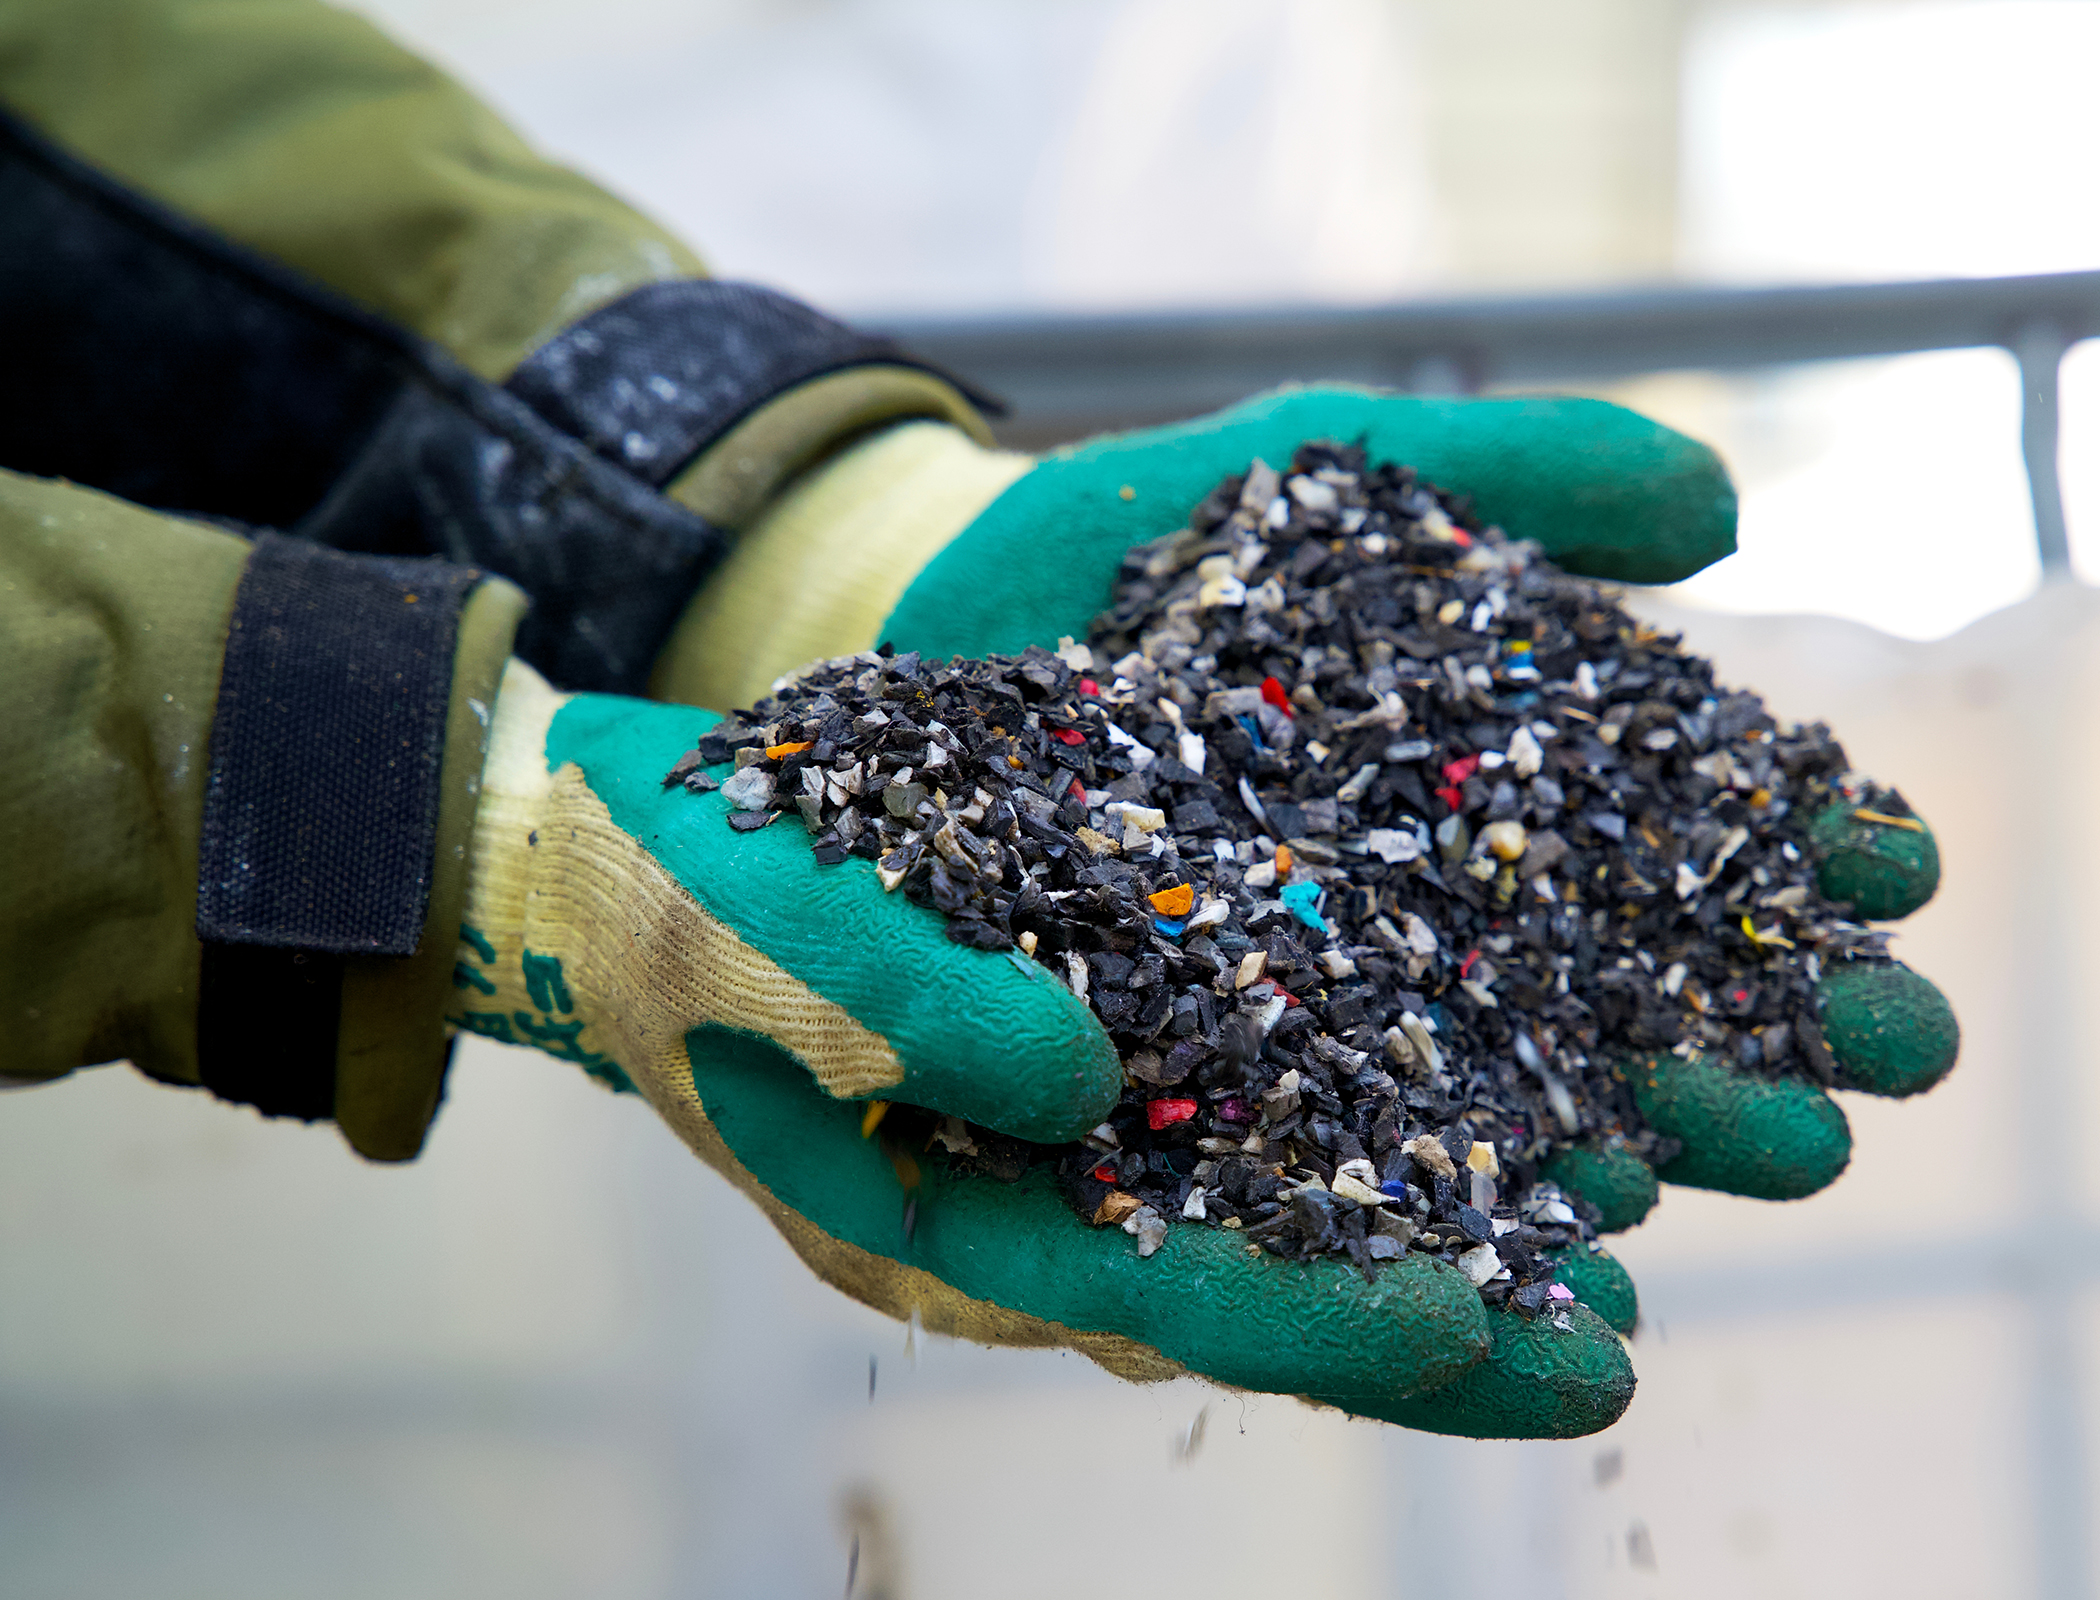 New plastic recycling process creates valuable oils from ‘junk’ waste